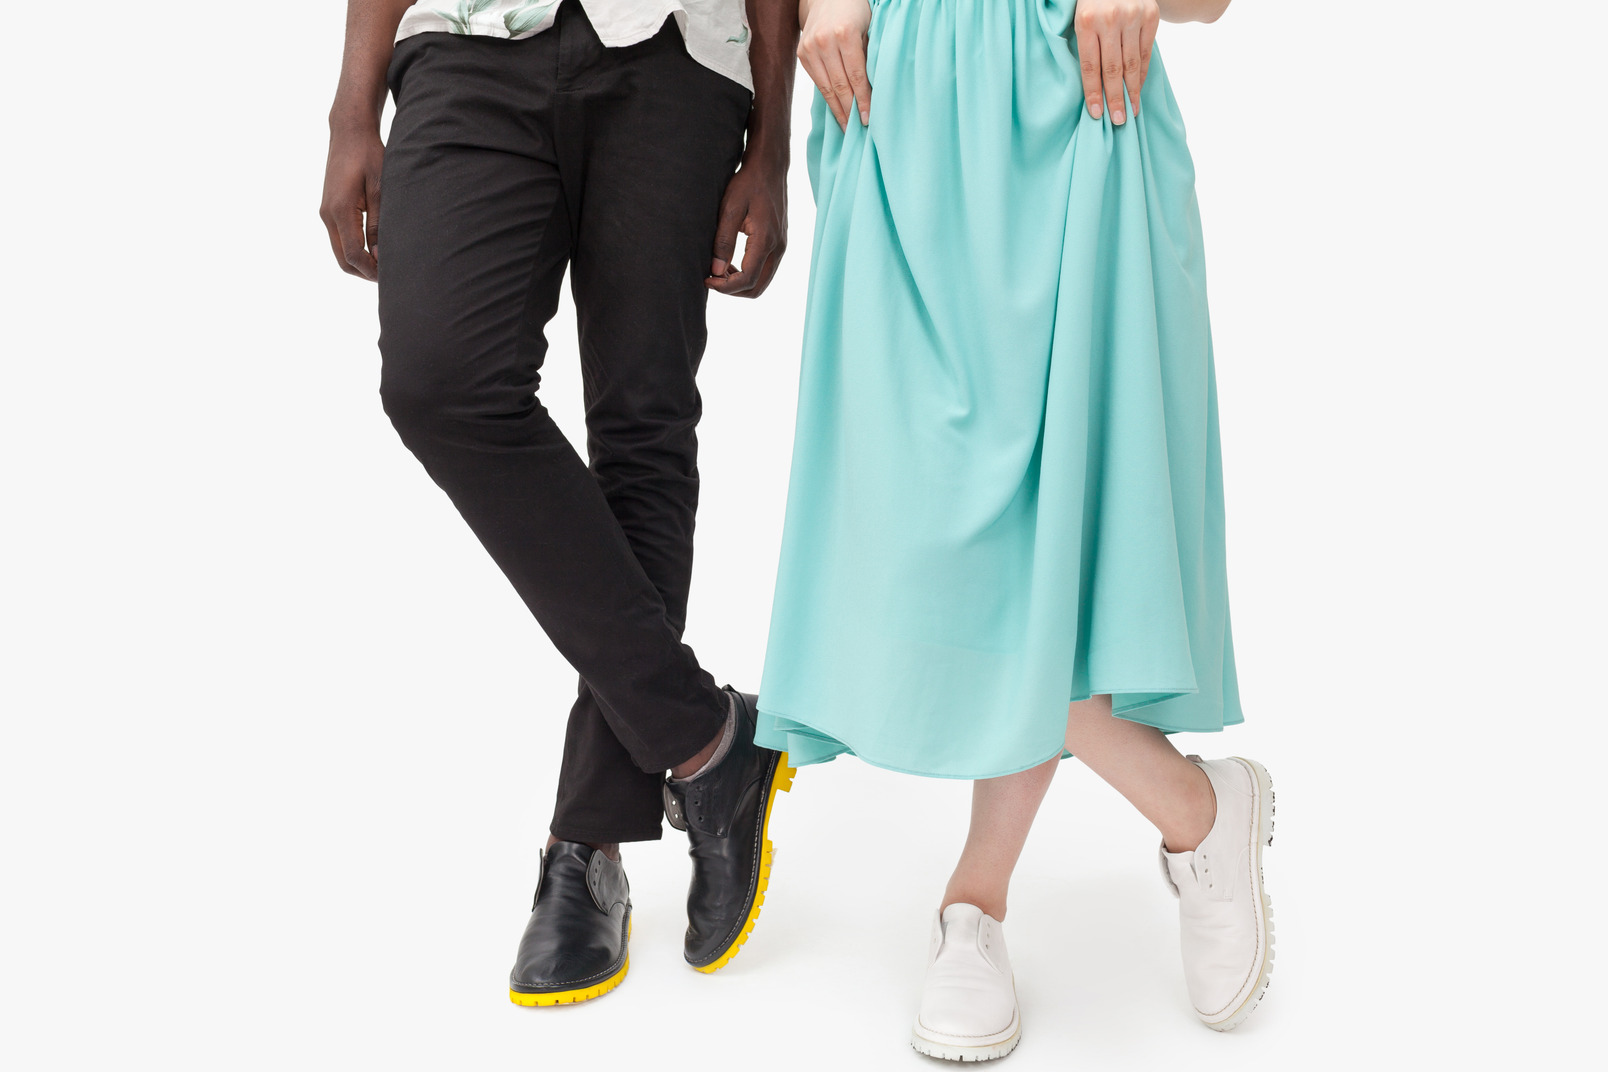 Interracial couple crossing legs and standing side by side